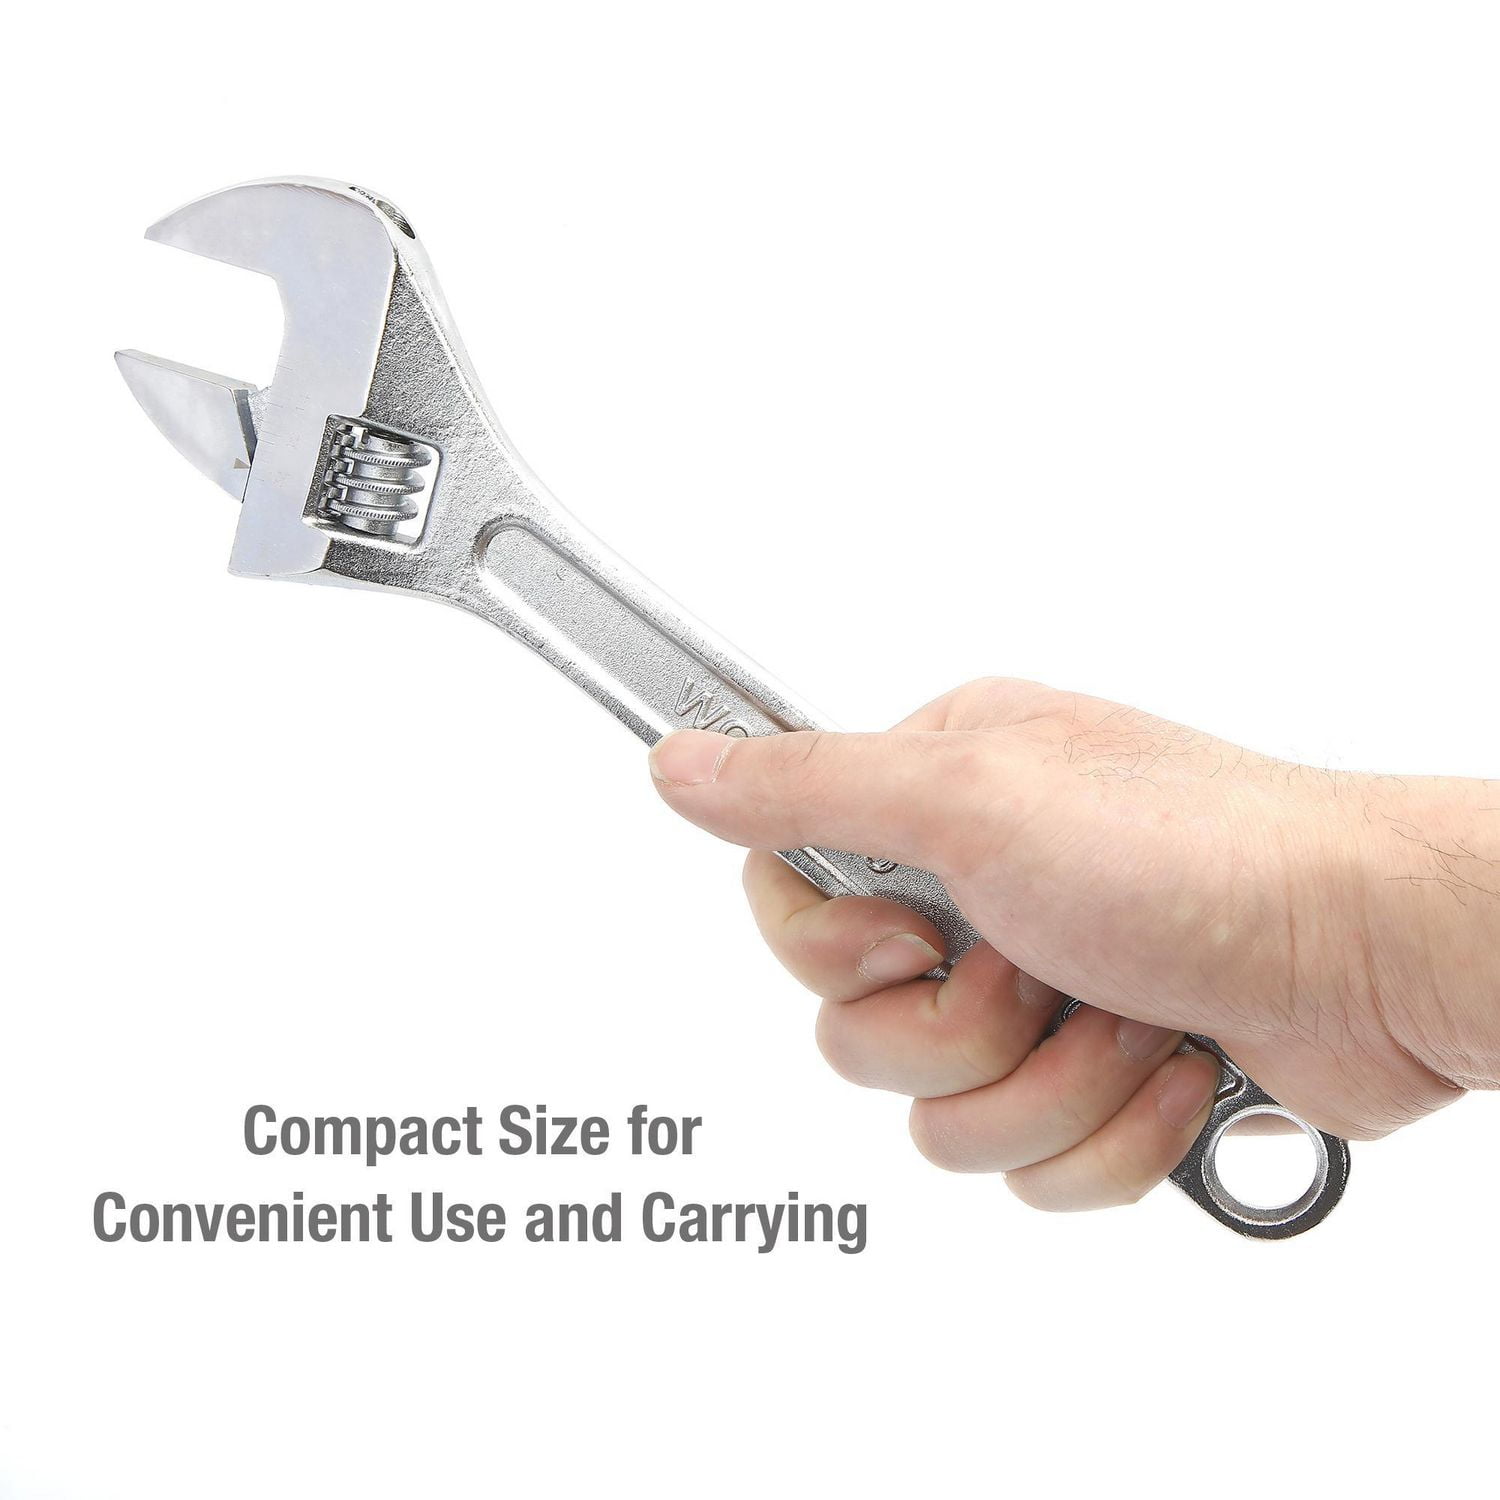 Adjustable Hook Spanner Wrench : HW-311 Model - MAXCLAW Hook Wrench  Manufacturing Expert